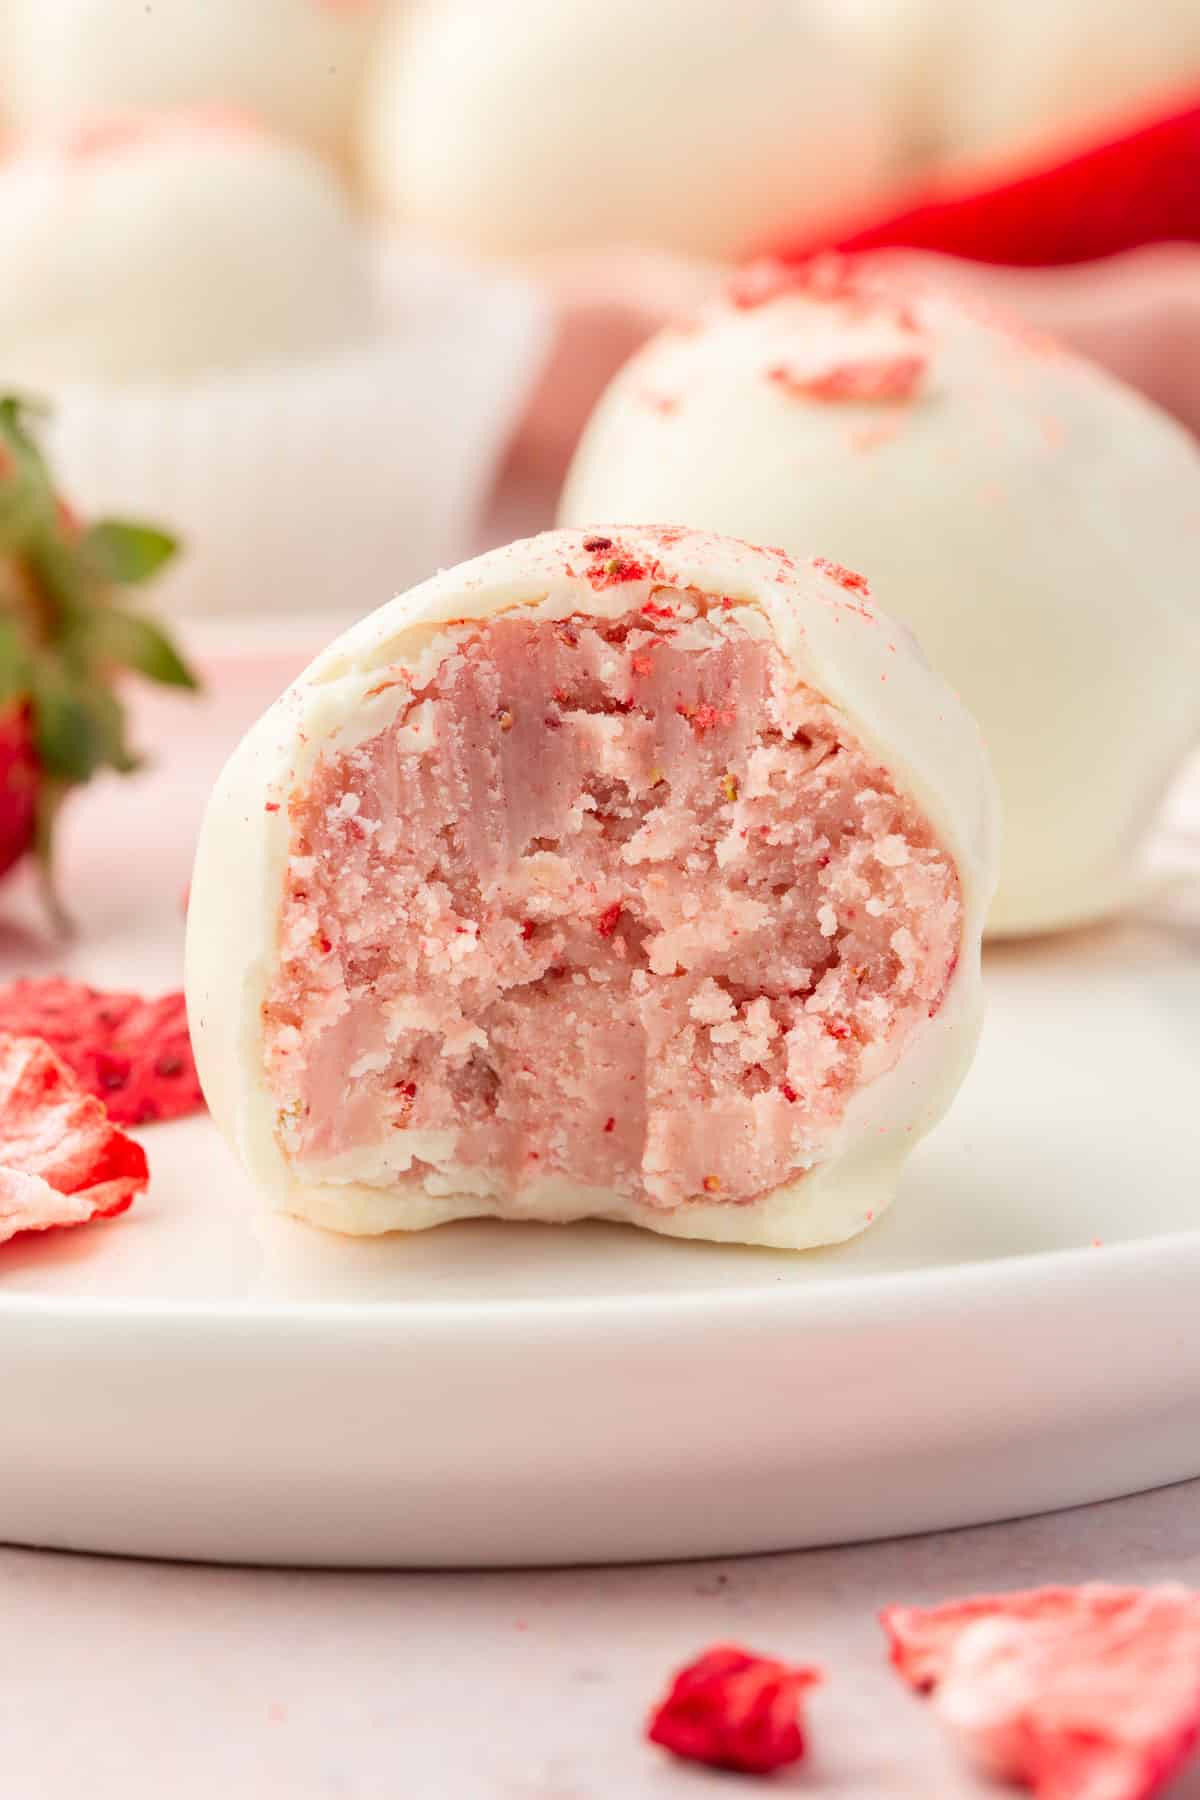 A single strawberry truffle coated in white chocolate on a plate with additional truffles in the background.